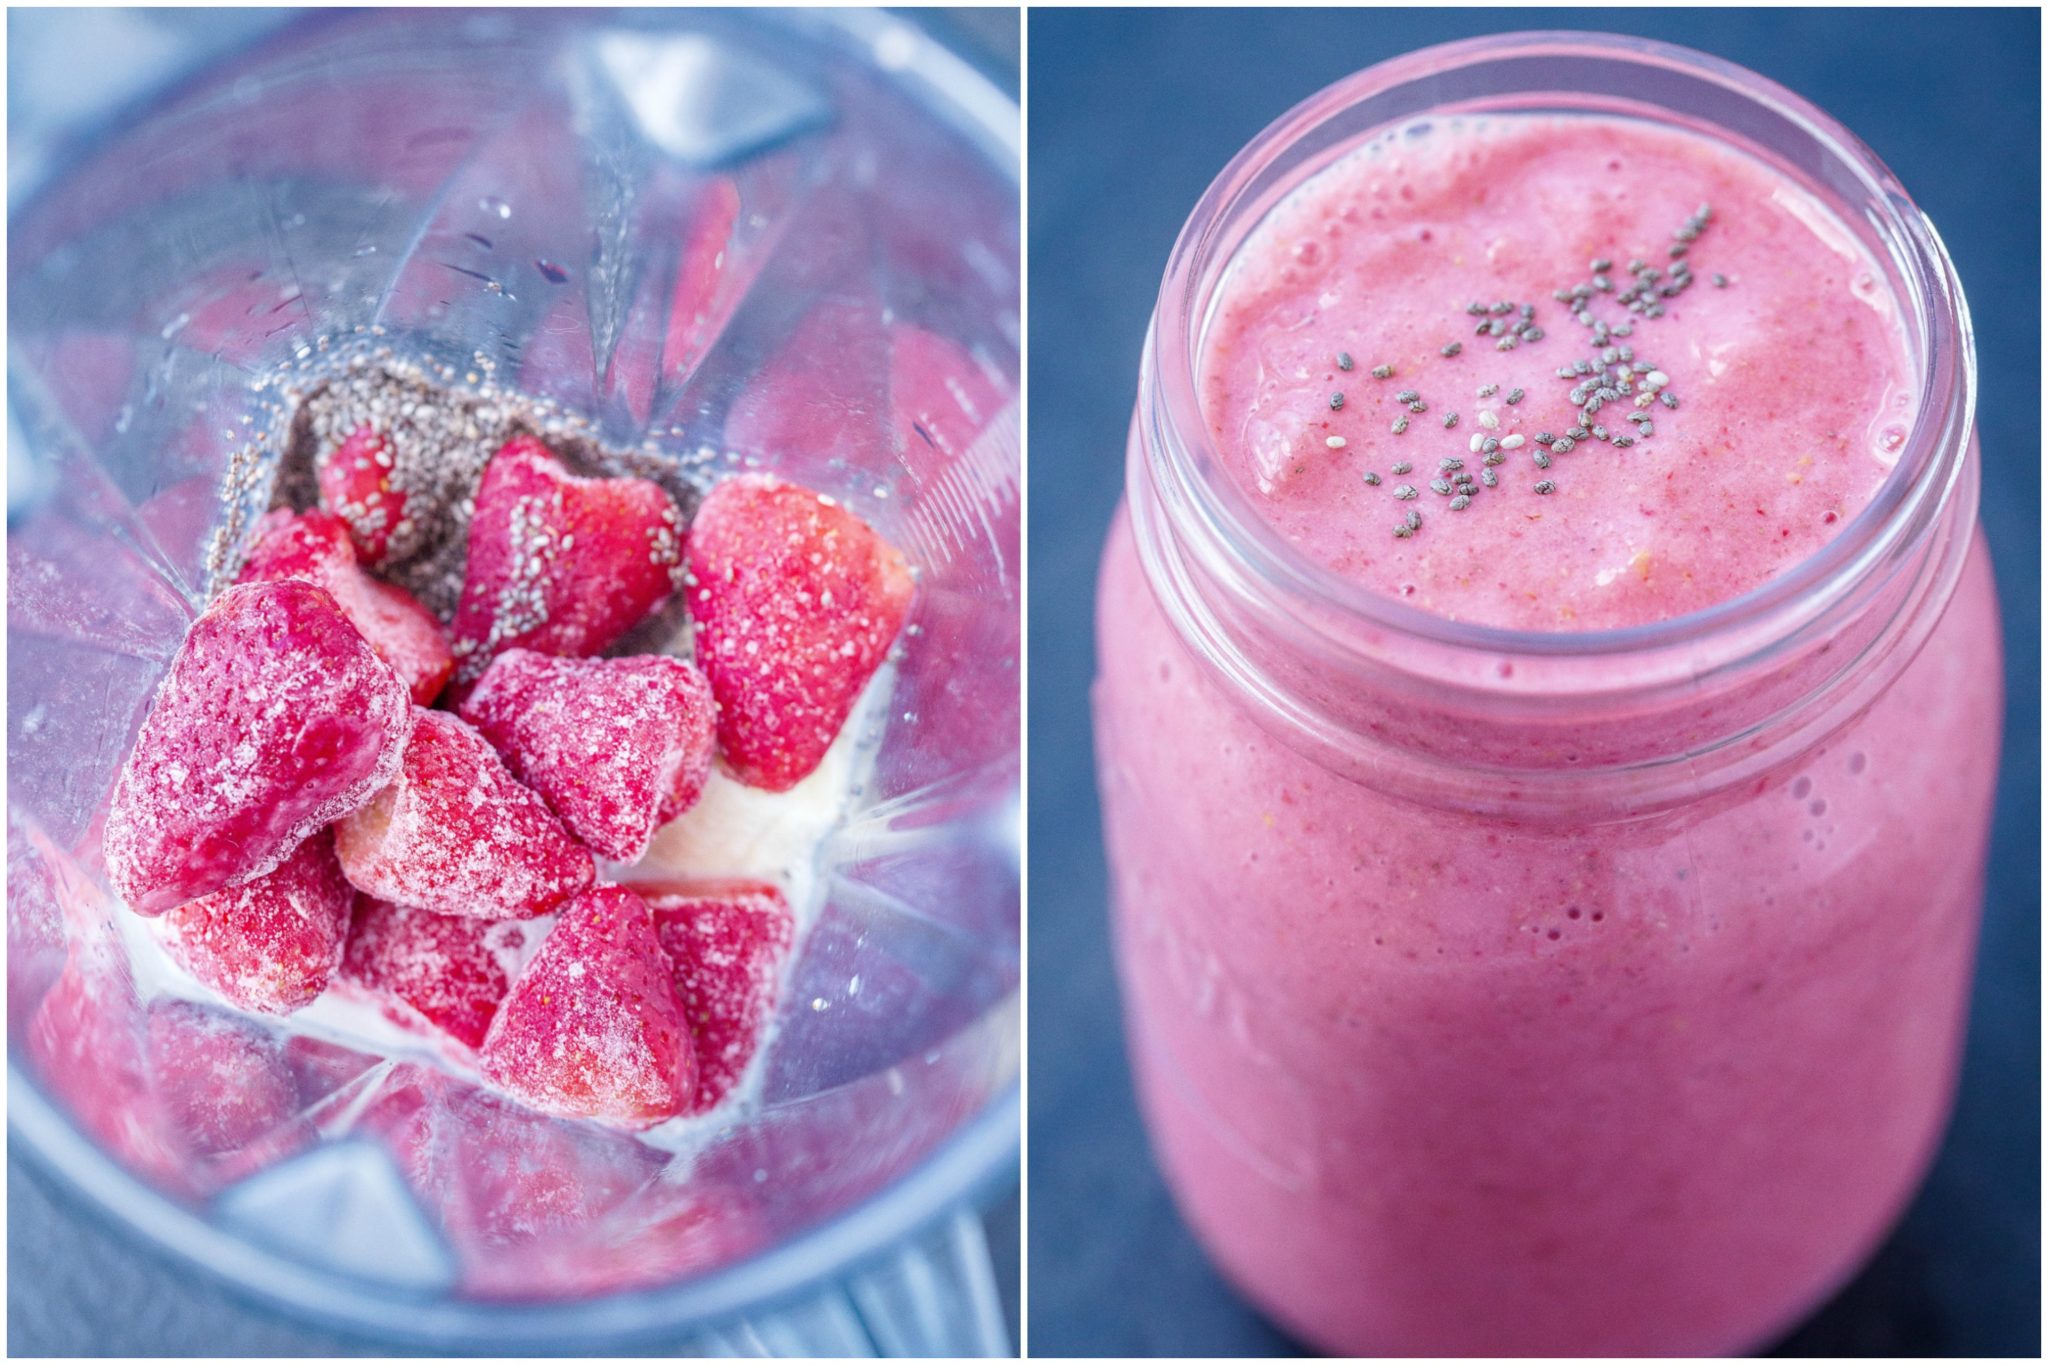 Strawberry Banana Smoothie in blender and jar